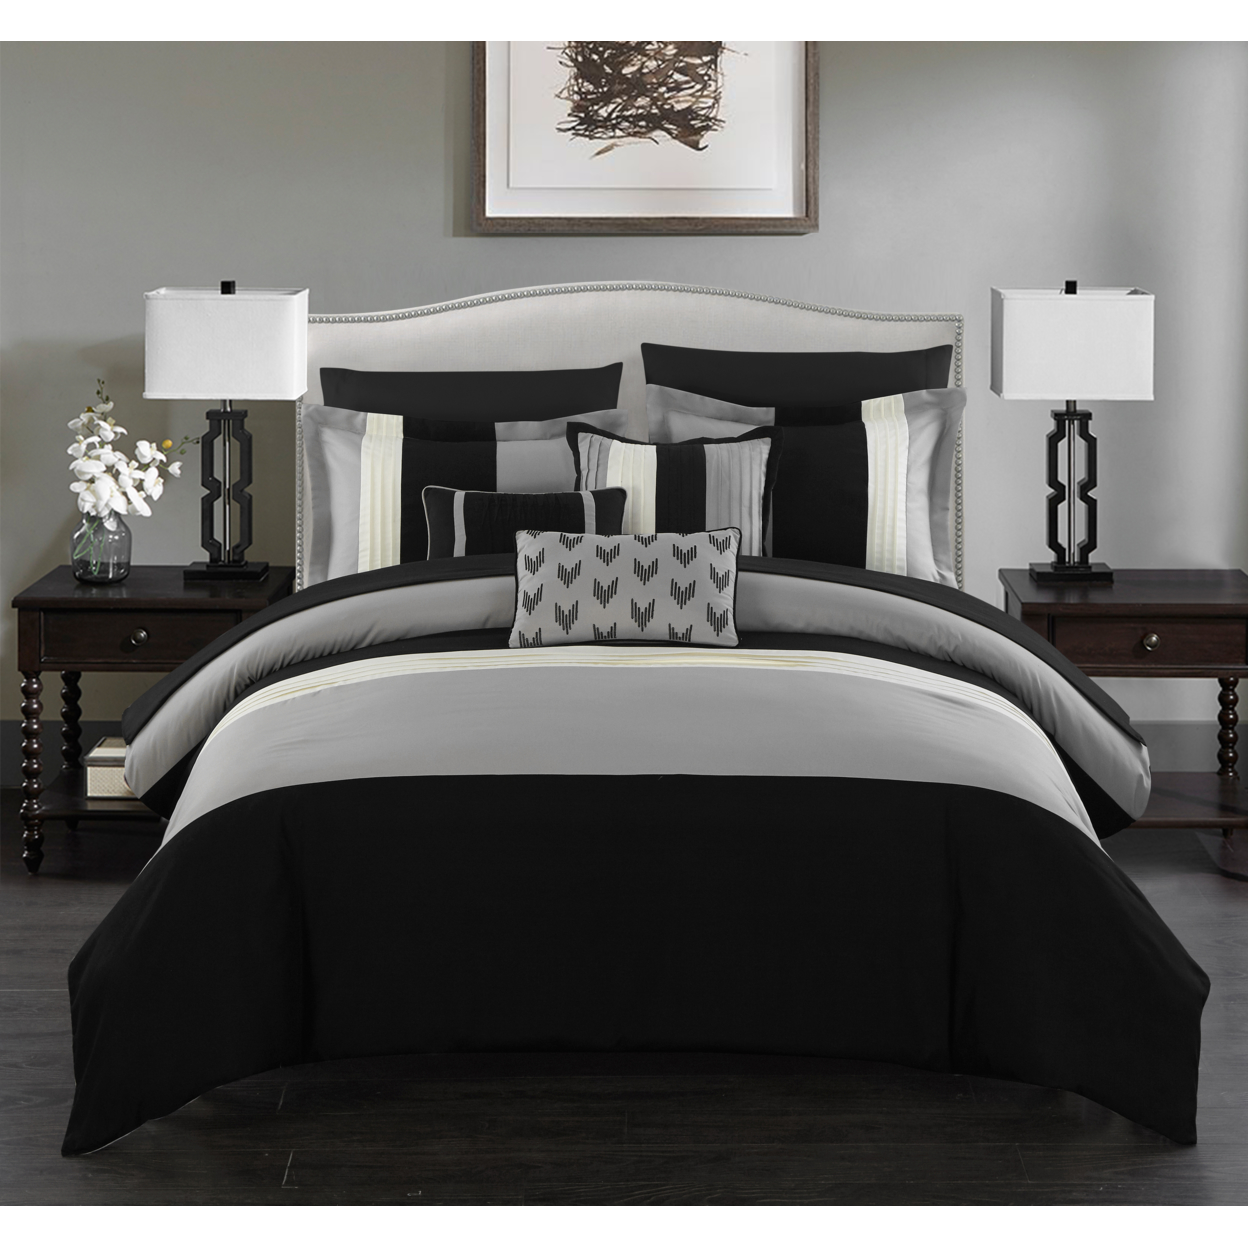 Rashi 10 Or 8 Piece Color Block Bed In A Bag Bedding And Comforter Set - Black, Twin